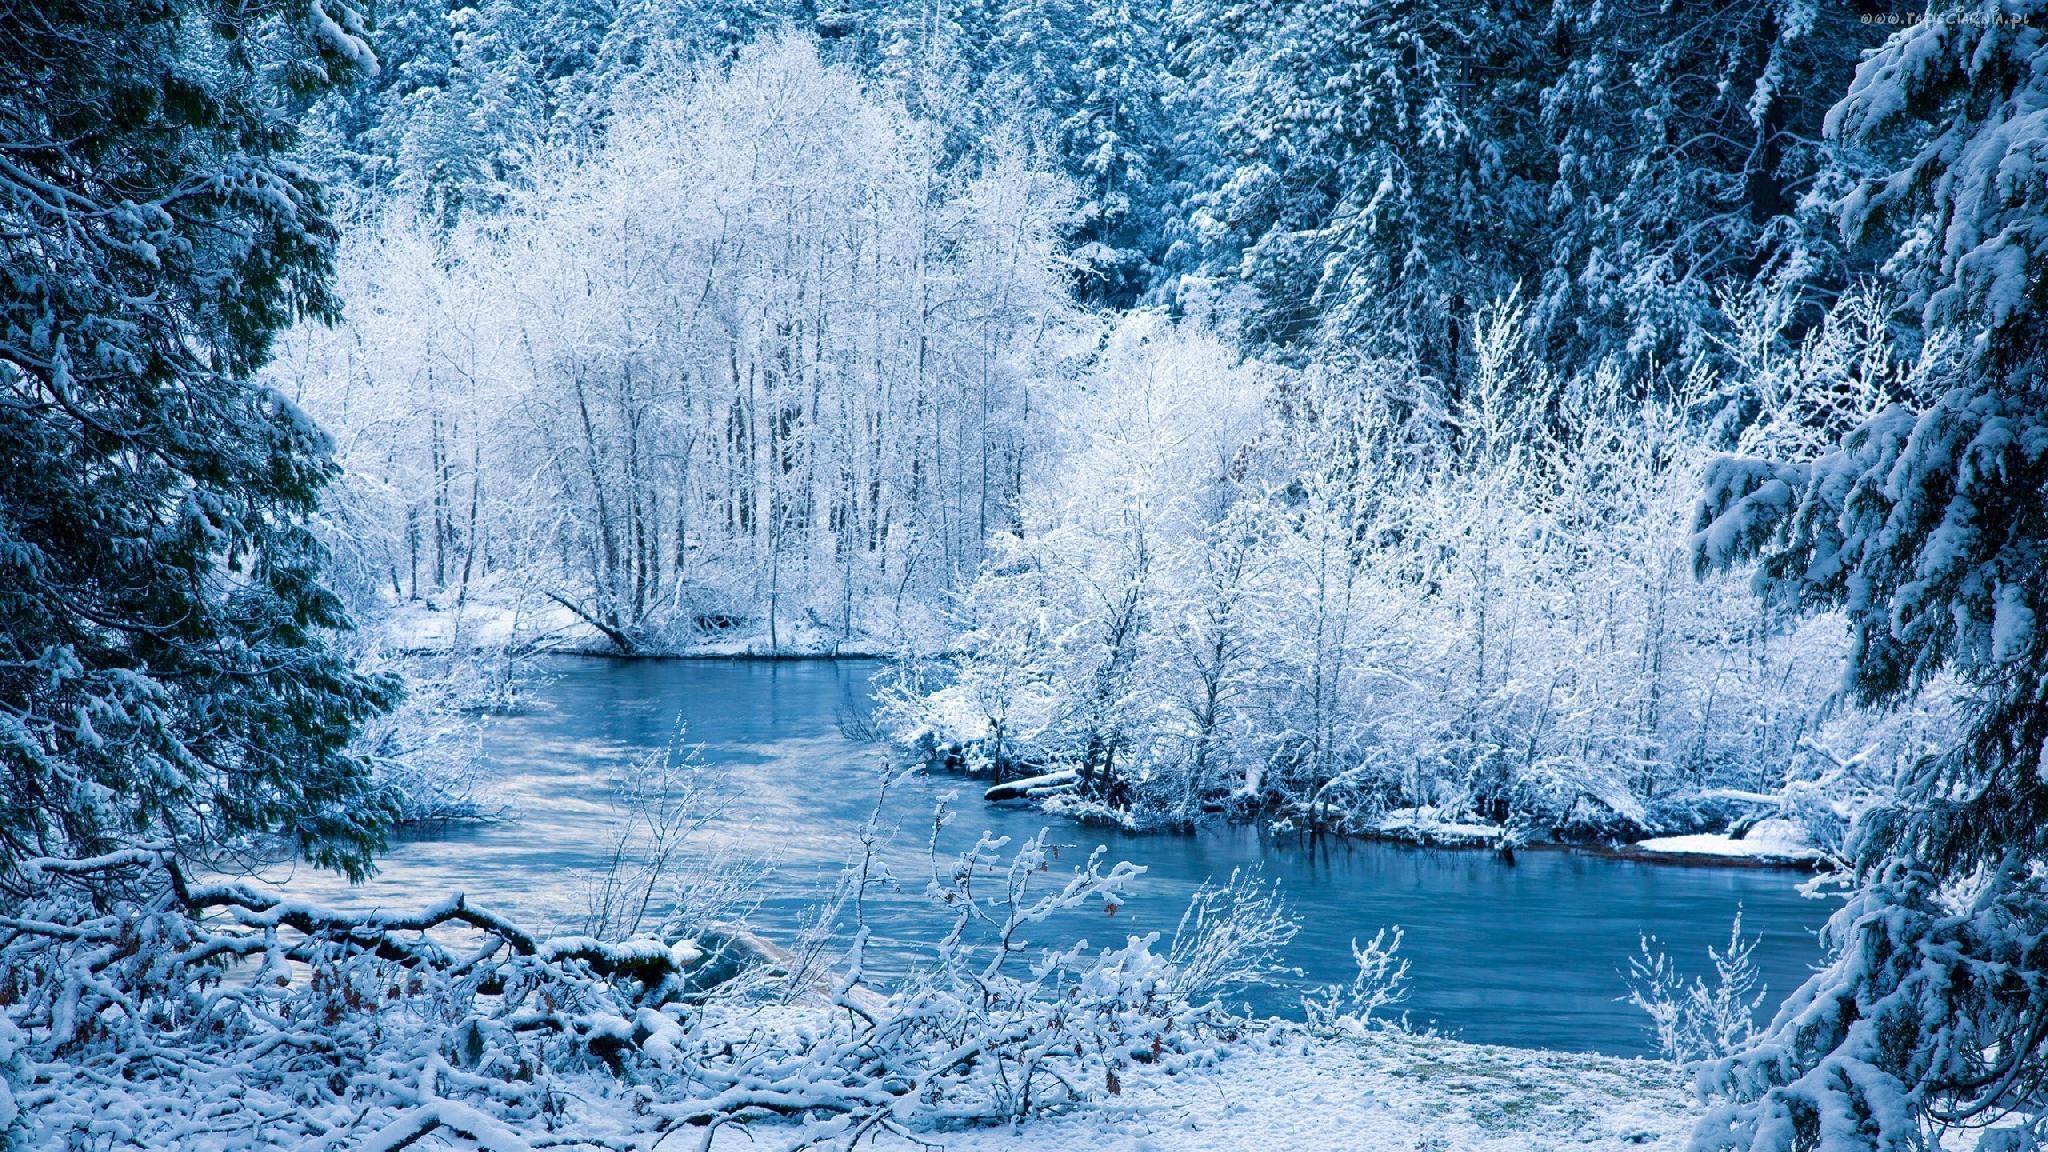 General 2048x1152 nature river winter cold ice frost snow trees